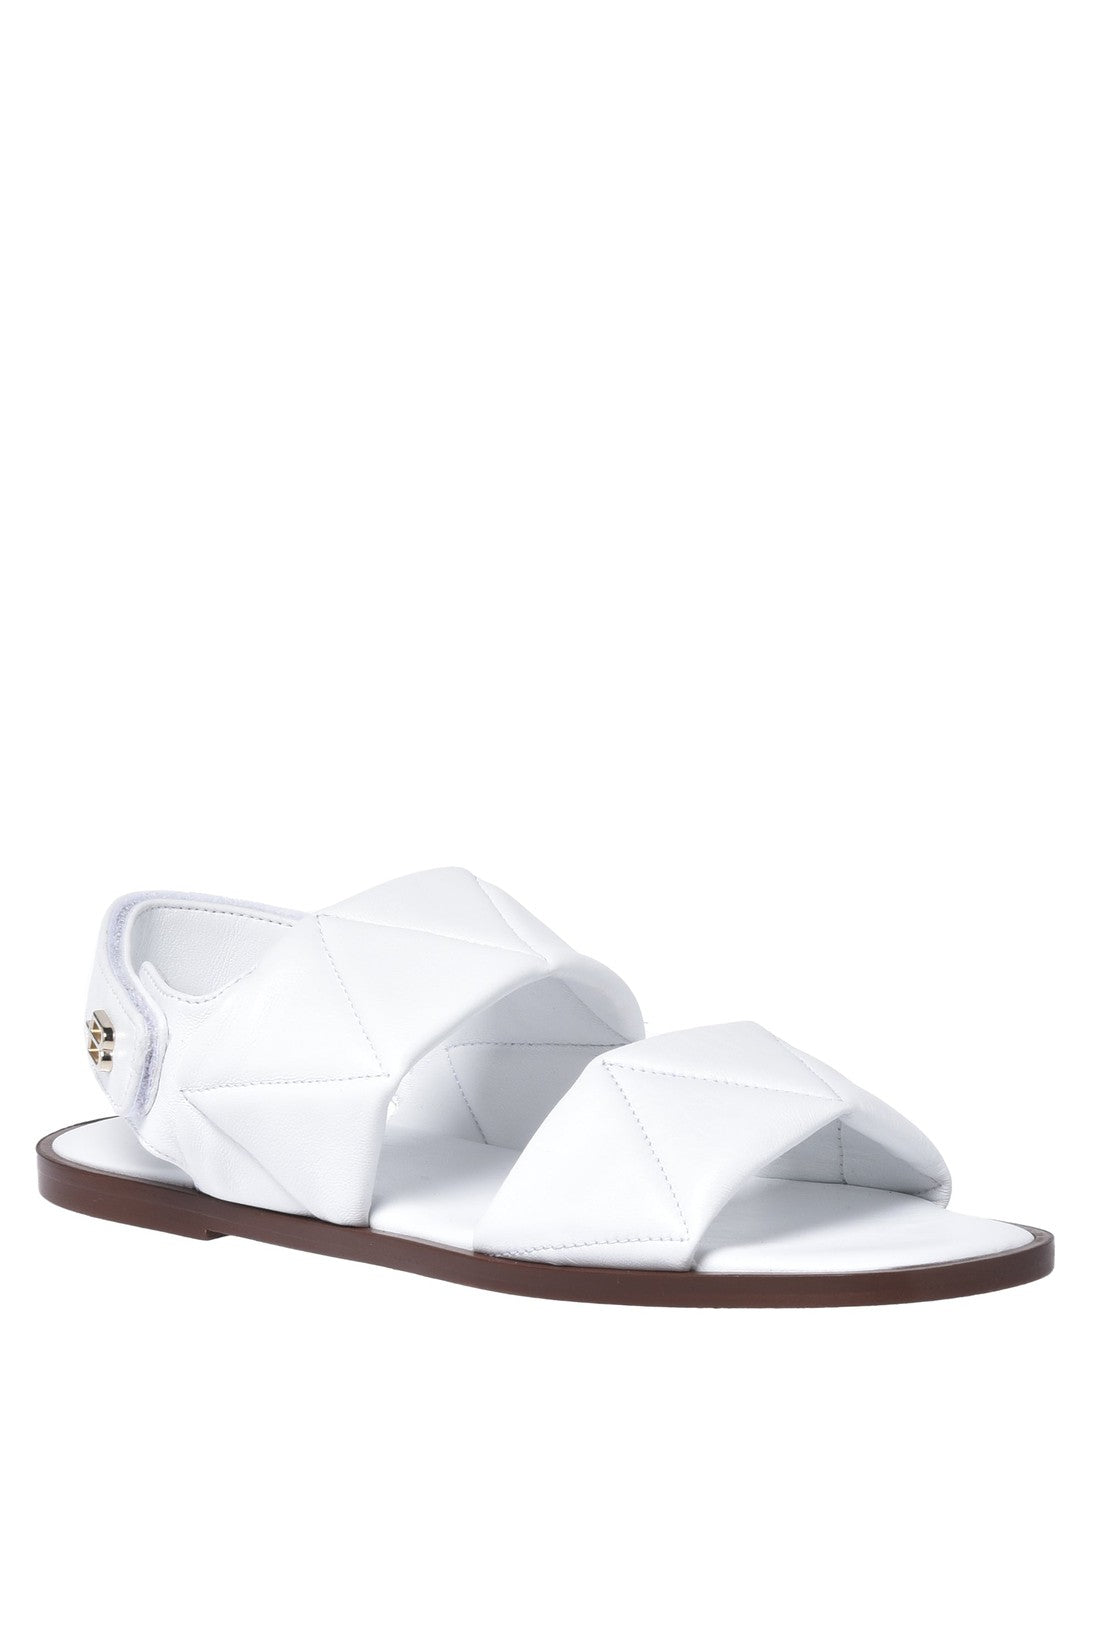 BALDININI-OUTLET-SALE-Sandal-in-white-quilted-leather-Sandalen-35-ARCHIVE-COLLECTION.jpg